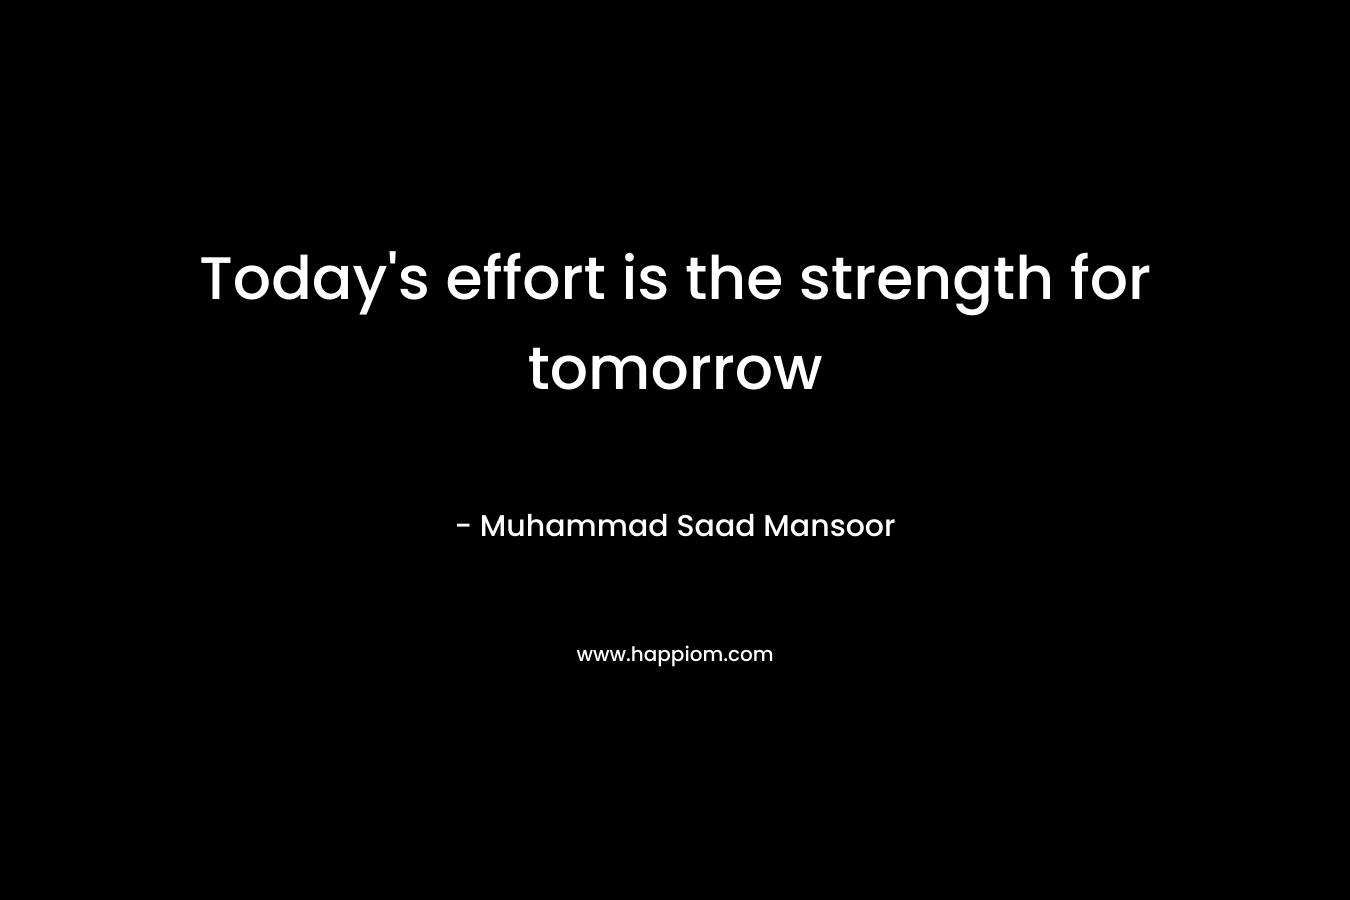 Today's effort is the strength for tomorrow